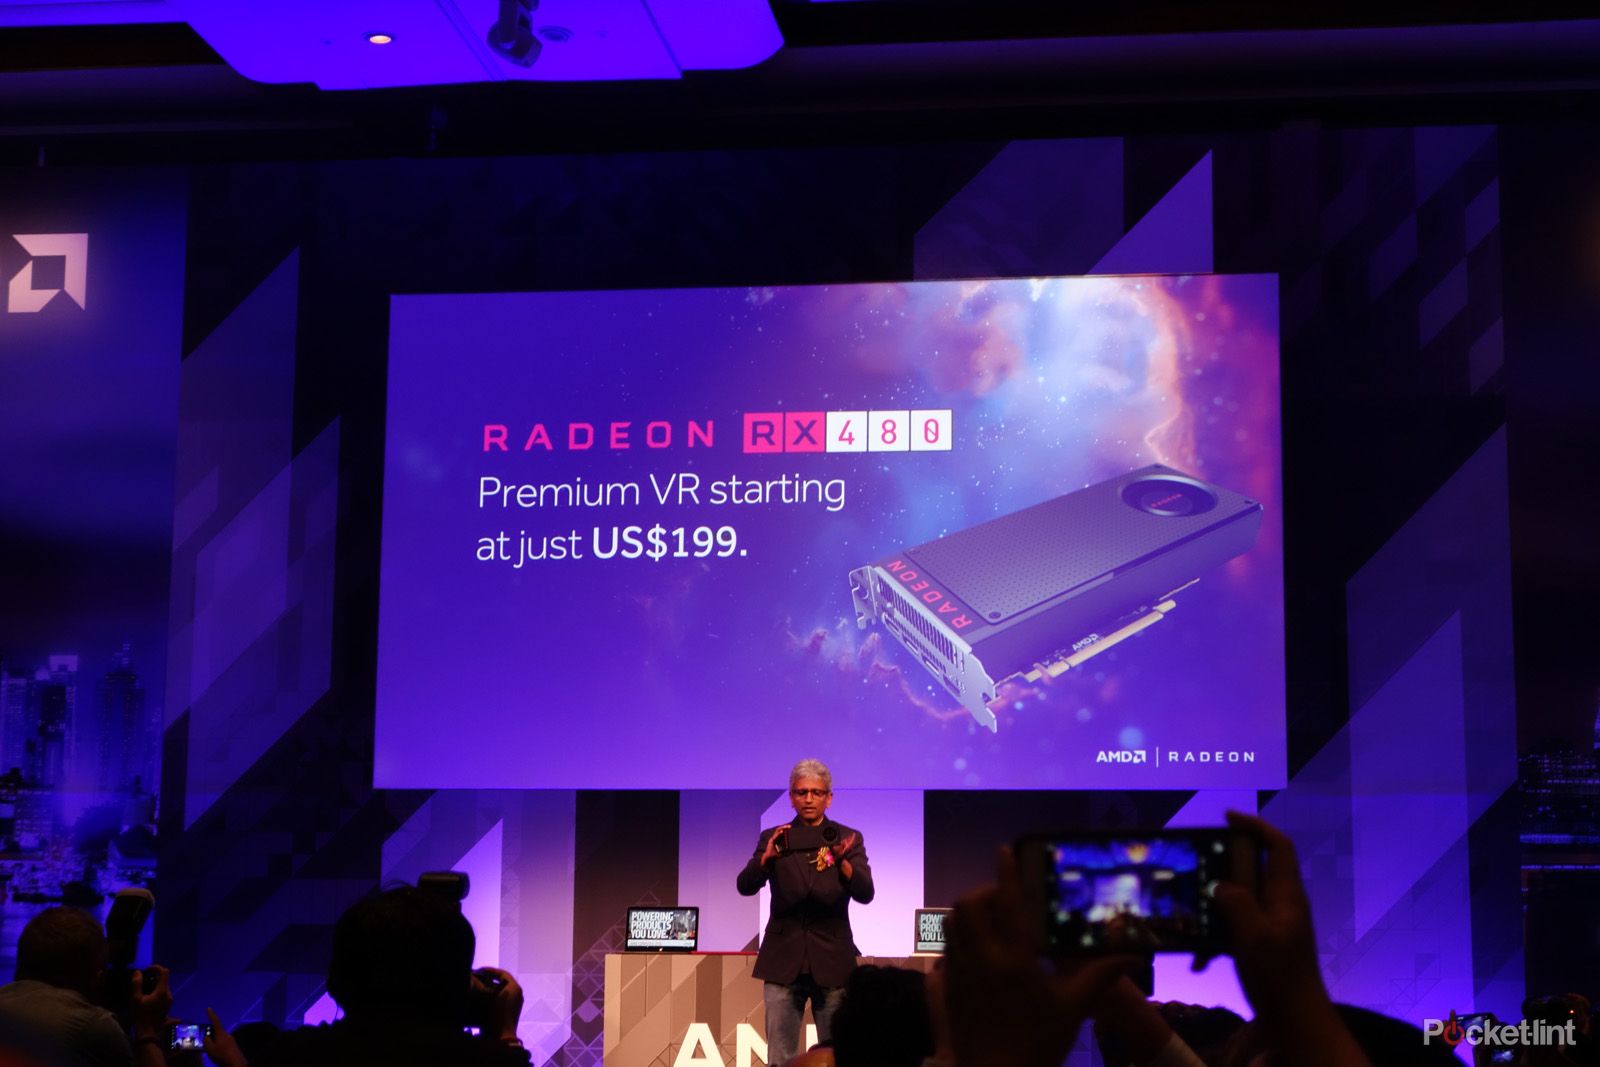 amd radeon rx 480 graphics card makes vr much more affordable image 1